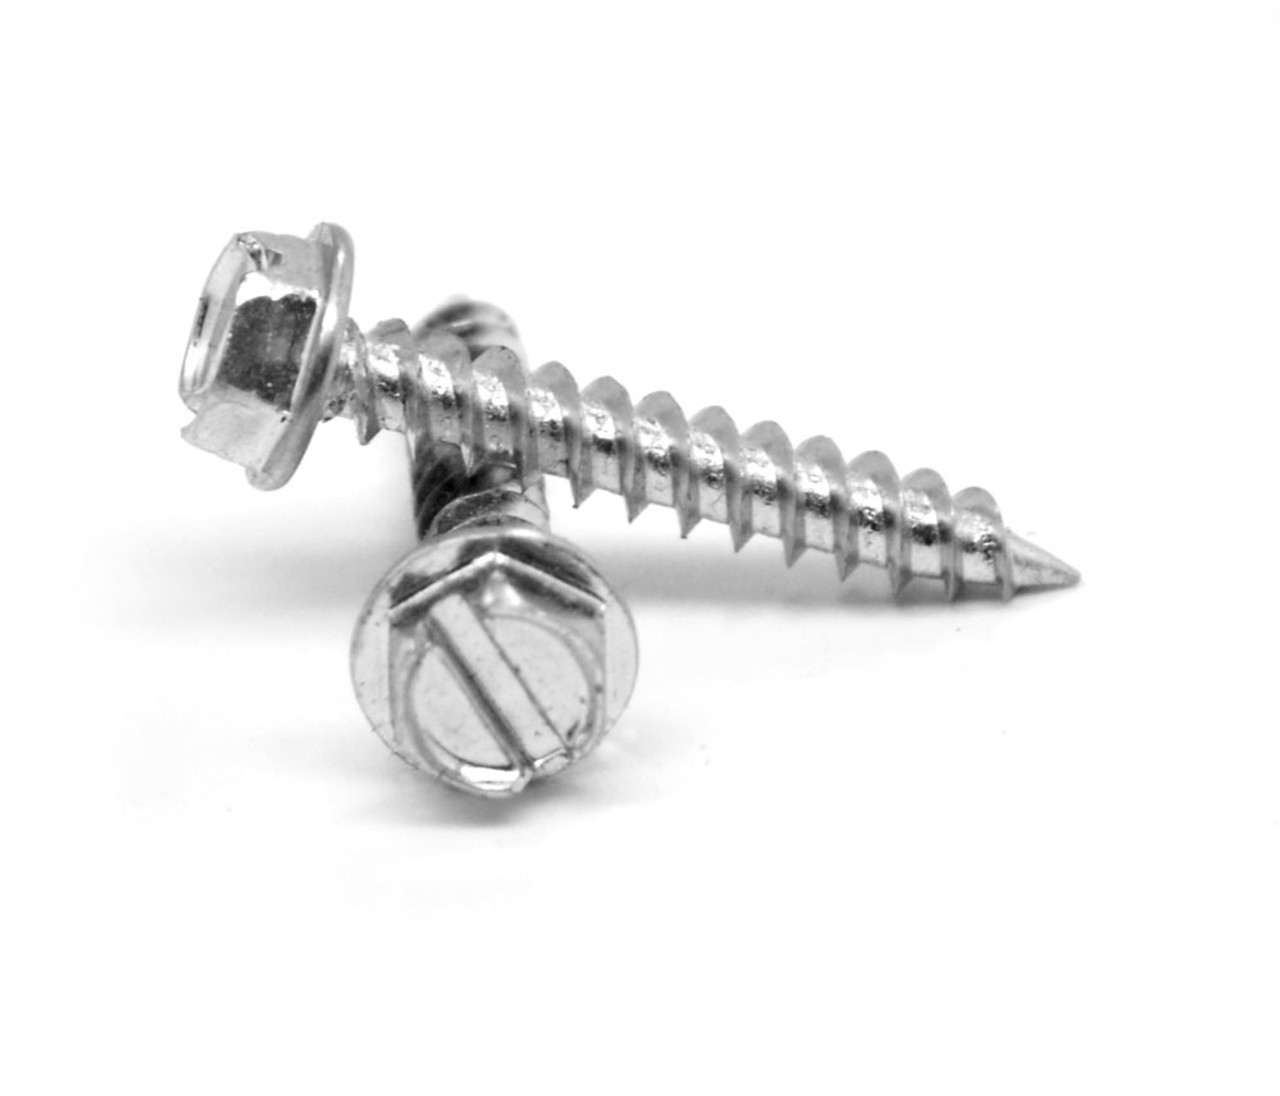 #4-24 x 1/4" Sheet Metal Screw Slotted Hex Washer Head Type AB Low Carbon Steel Zinc Plated